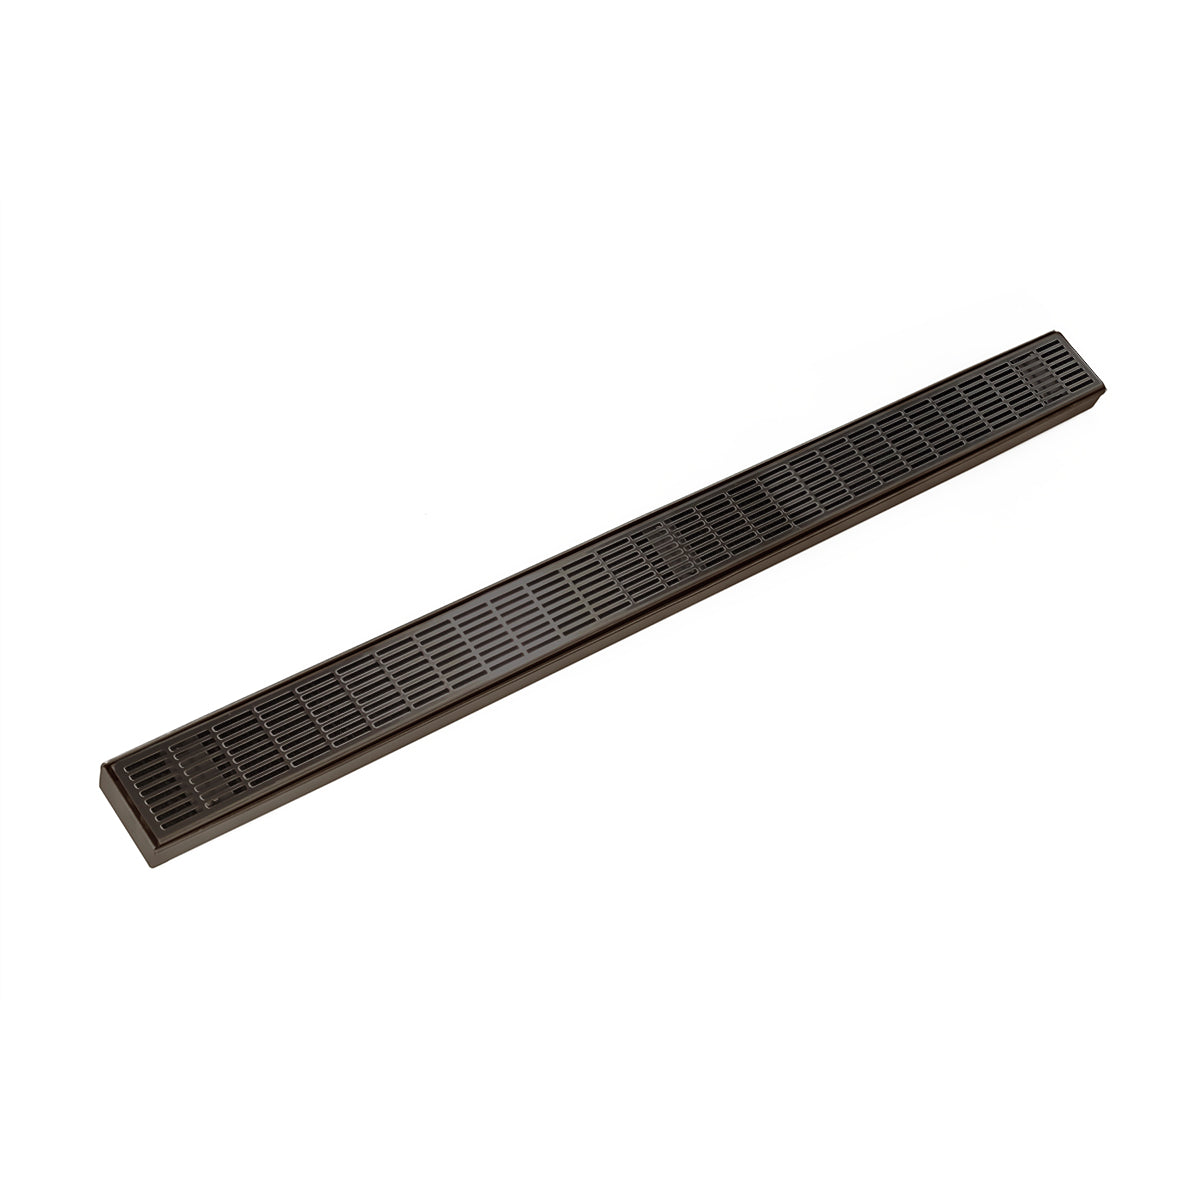 Infinity Drain 60" FX Series Fixed Length Linear Drain Kit with Perforated Slotted Grate